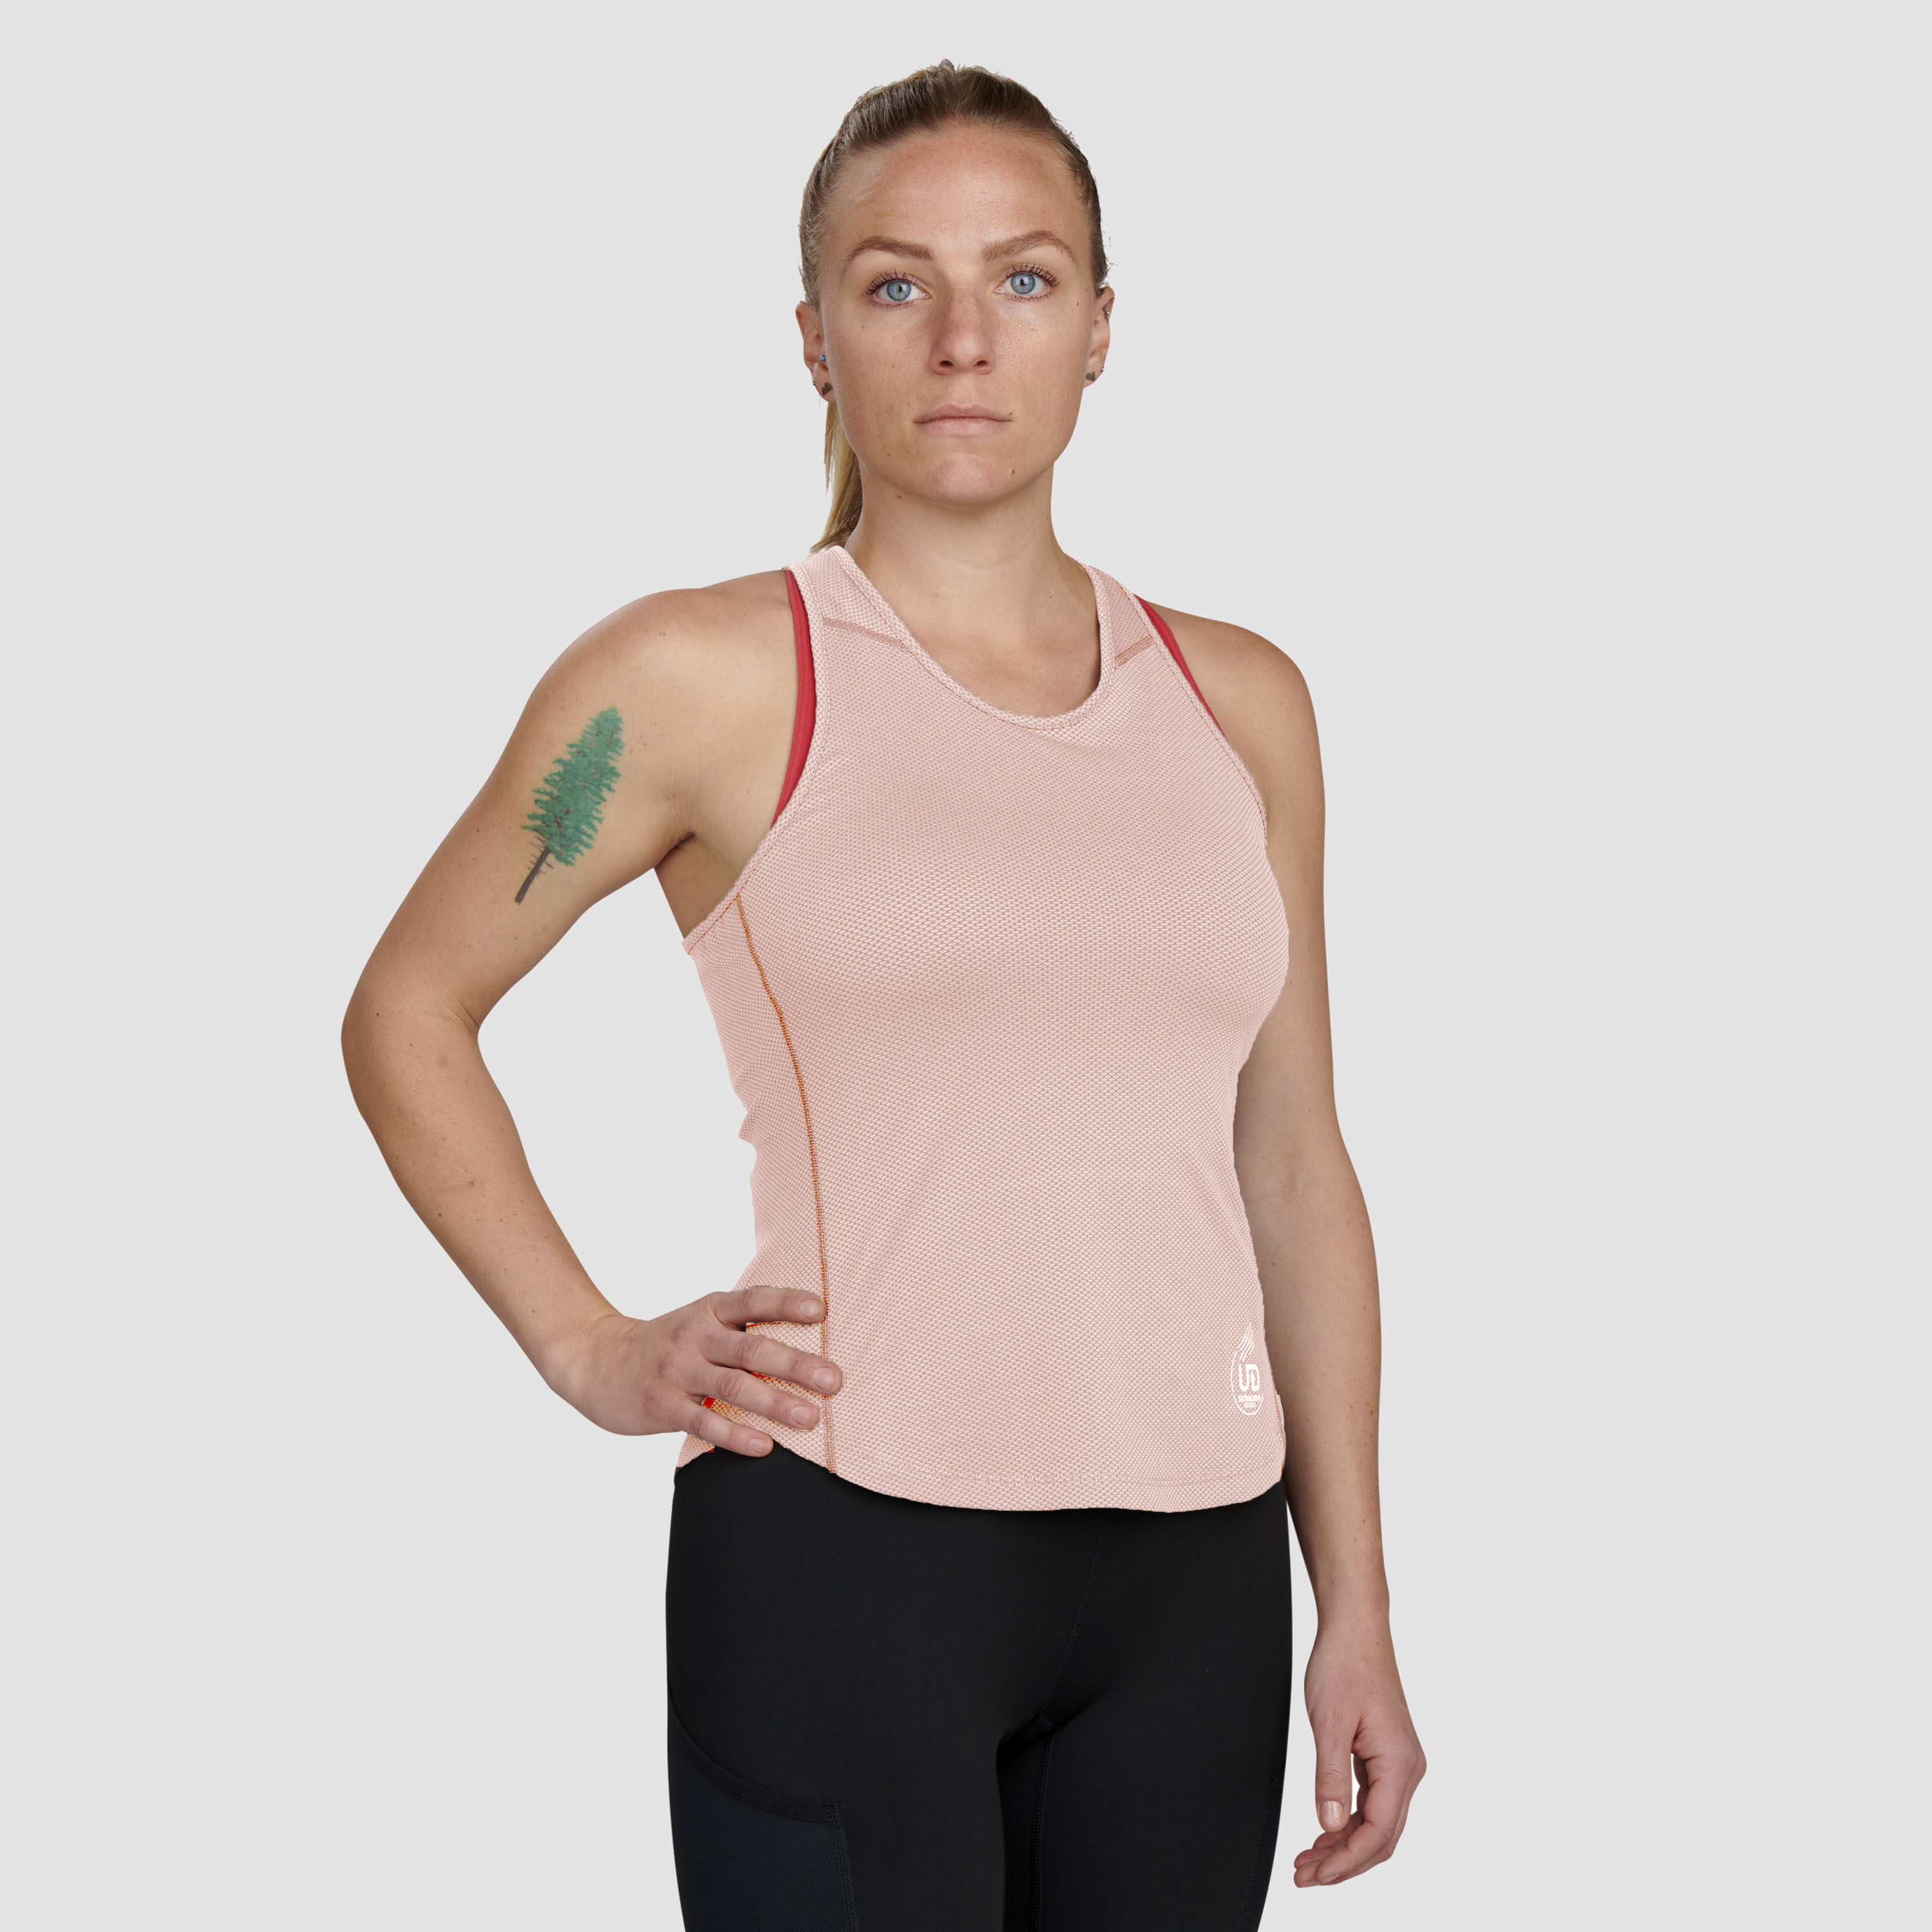 Ultimate Direction Women's Cumulus Tank Top - Prior Year in Millennial Pink Size XL